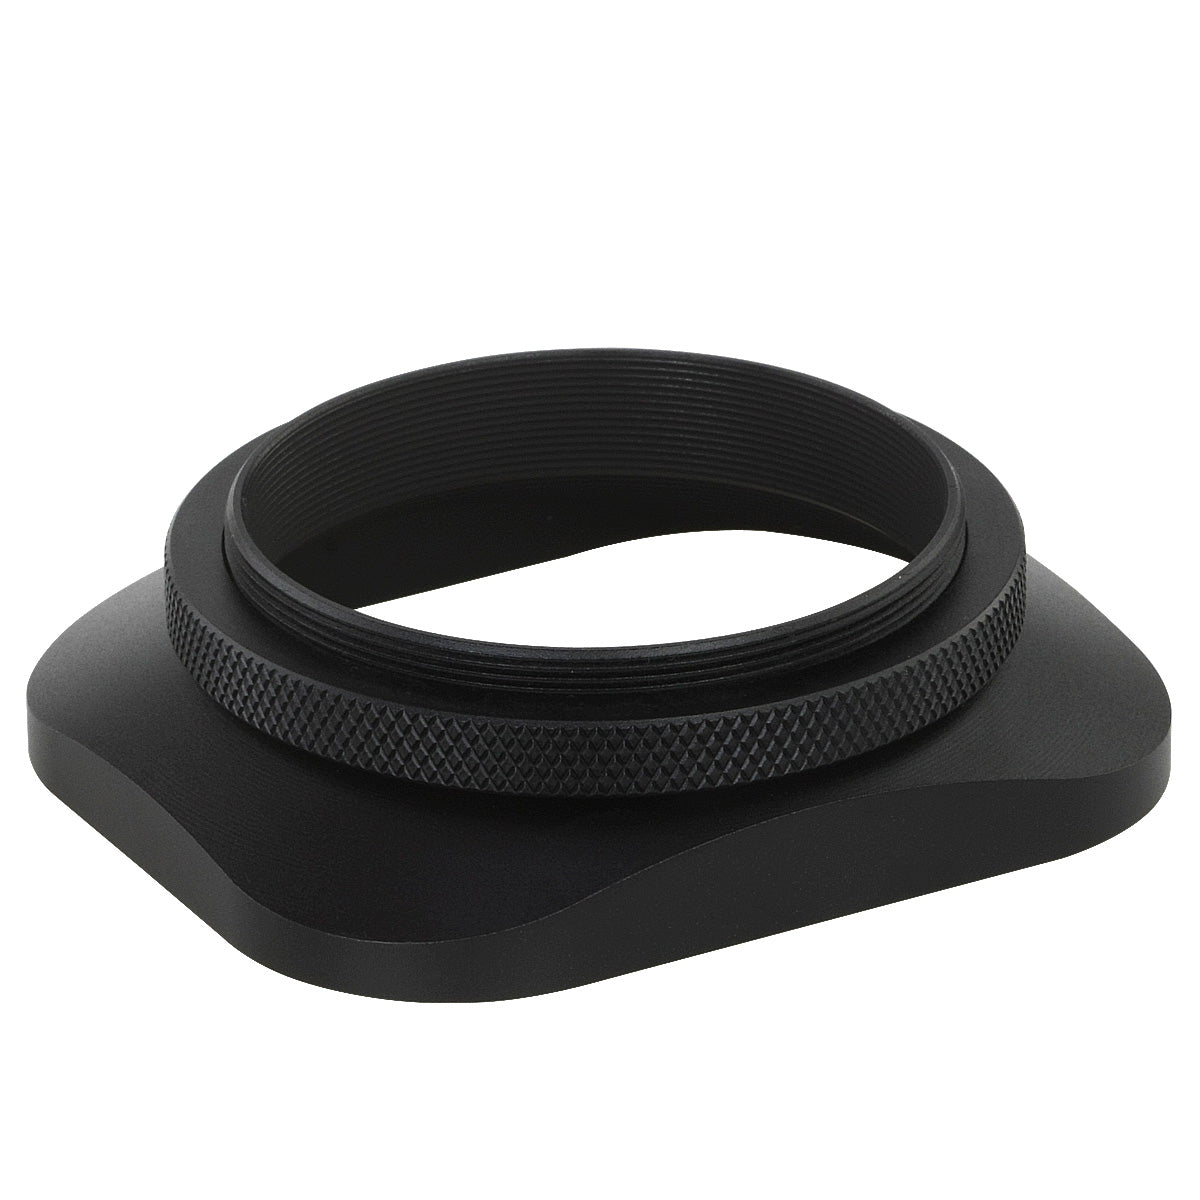 Haoge LH-E2T 49mm Square Metal Screw-in Lens Hood with Cap for Sony RX1 RX1R RX1RII Camera, Sony E 20mm f2.8, 28mm f2, 30mm f3.5, 35mm f1.8, 50mm f1.8, TE 24mm F1.8, 55mm F1.8, TFE 35mm F2.8 Lens